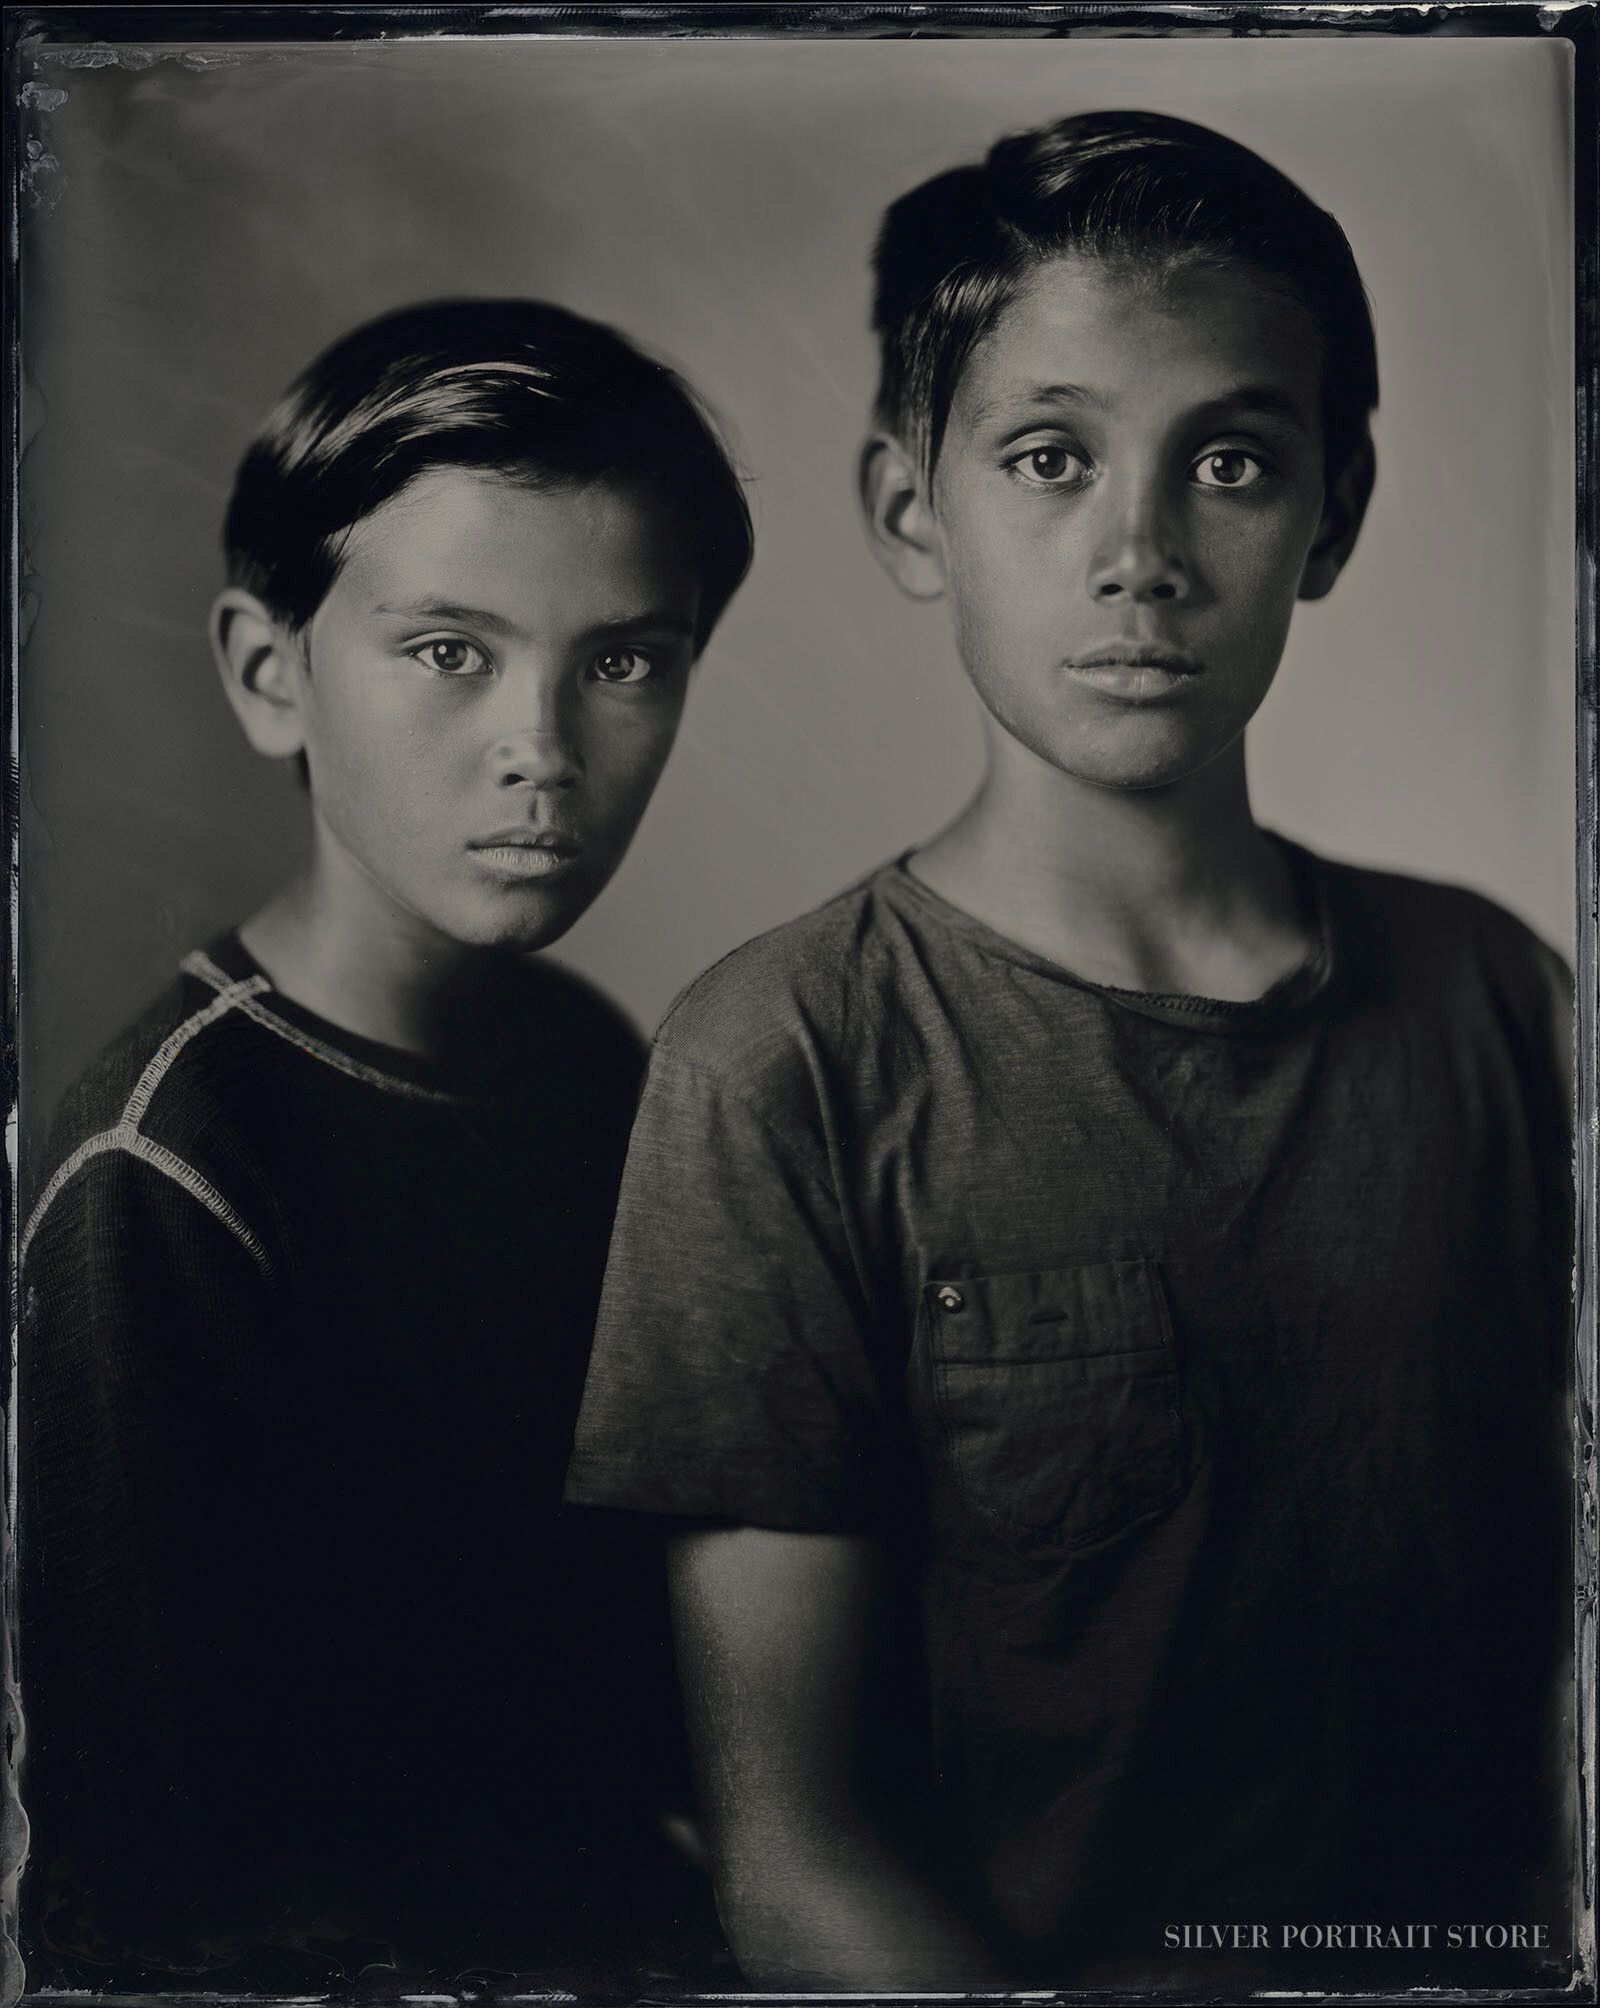 Diego & Santino-Silver Portrait Store-Scan from Wet plate collodion-Tintype 20 x 25 cm.